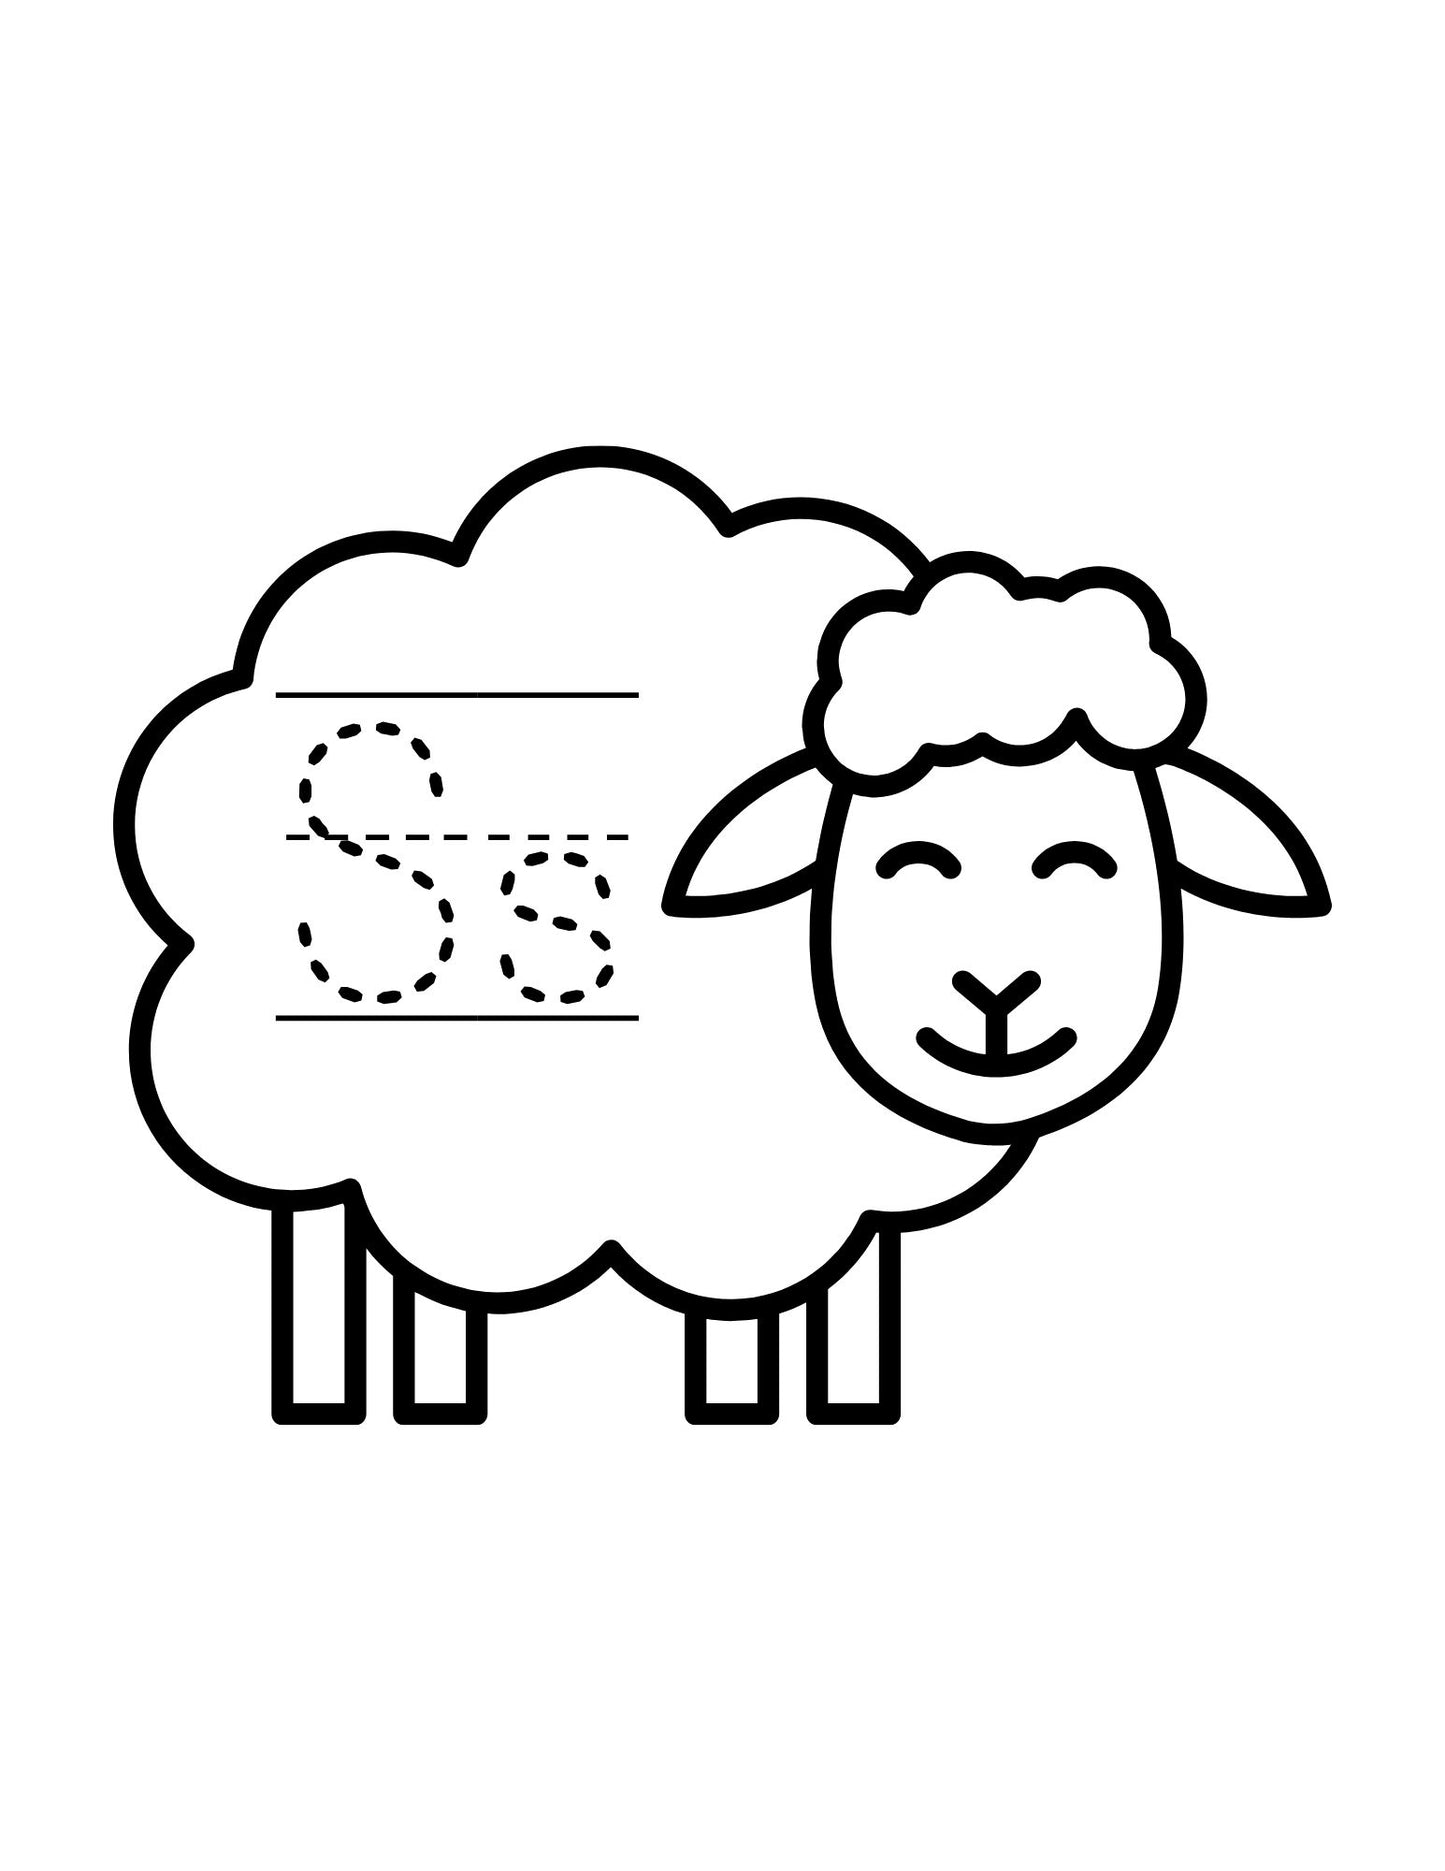 Sheep Alphabet and Number Tracing